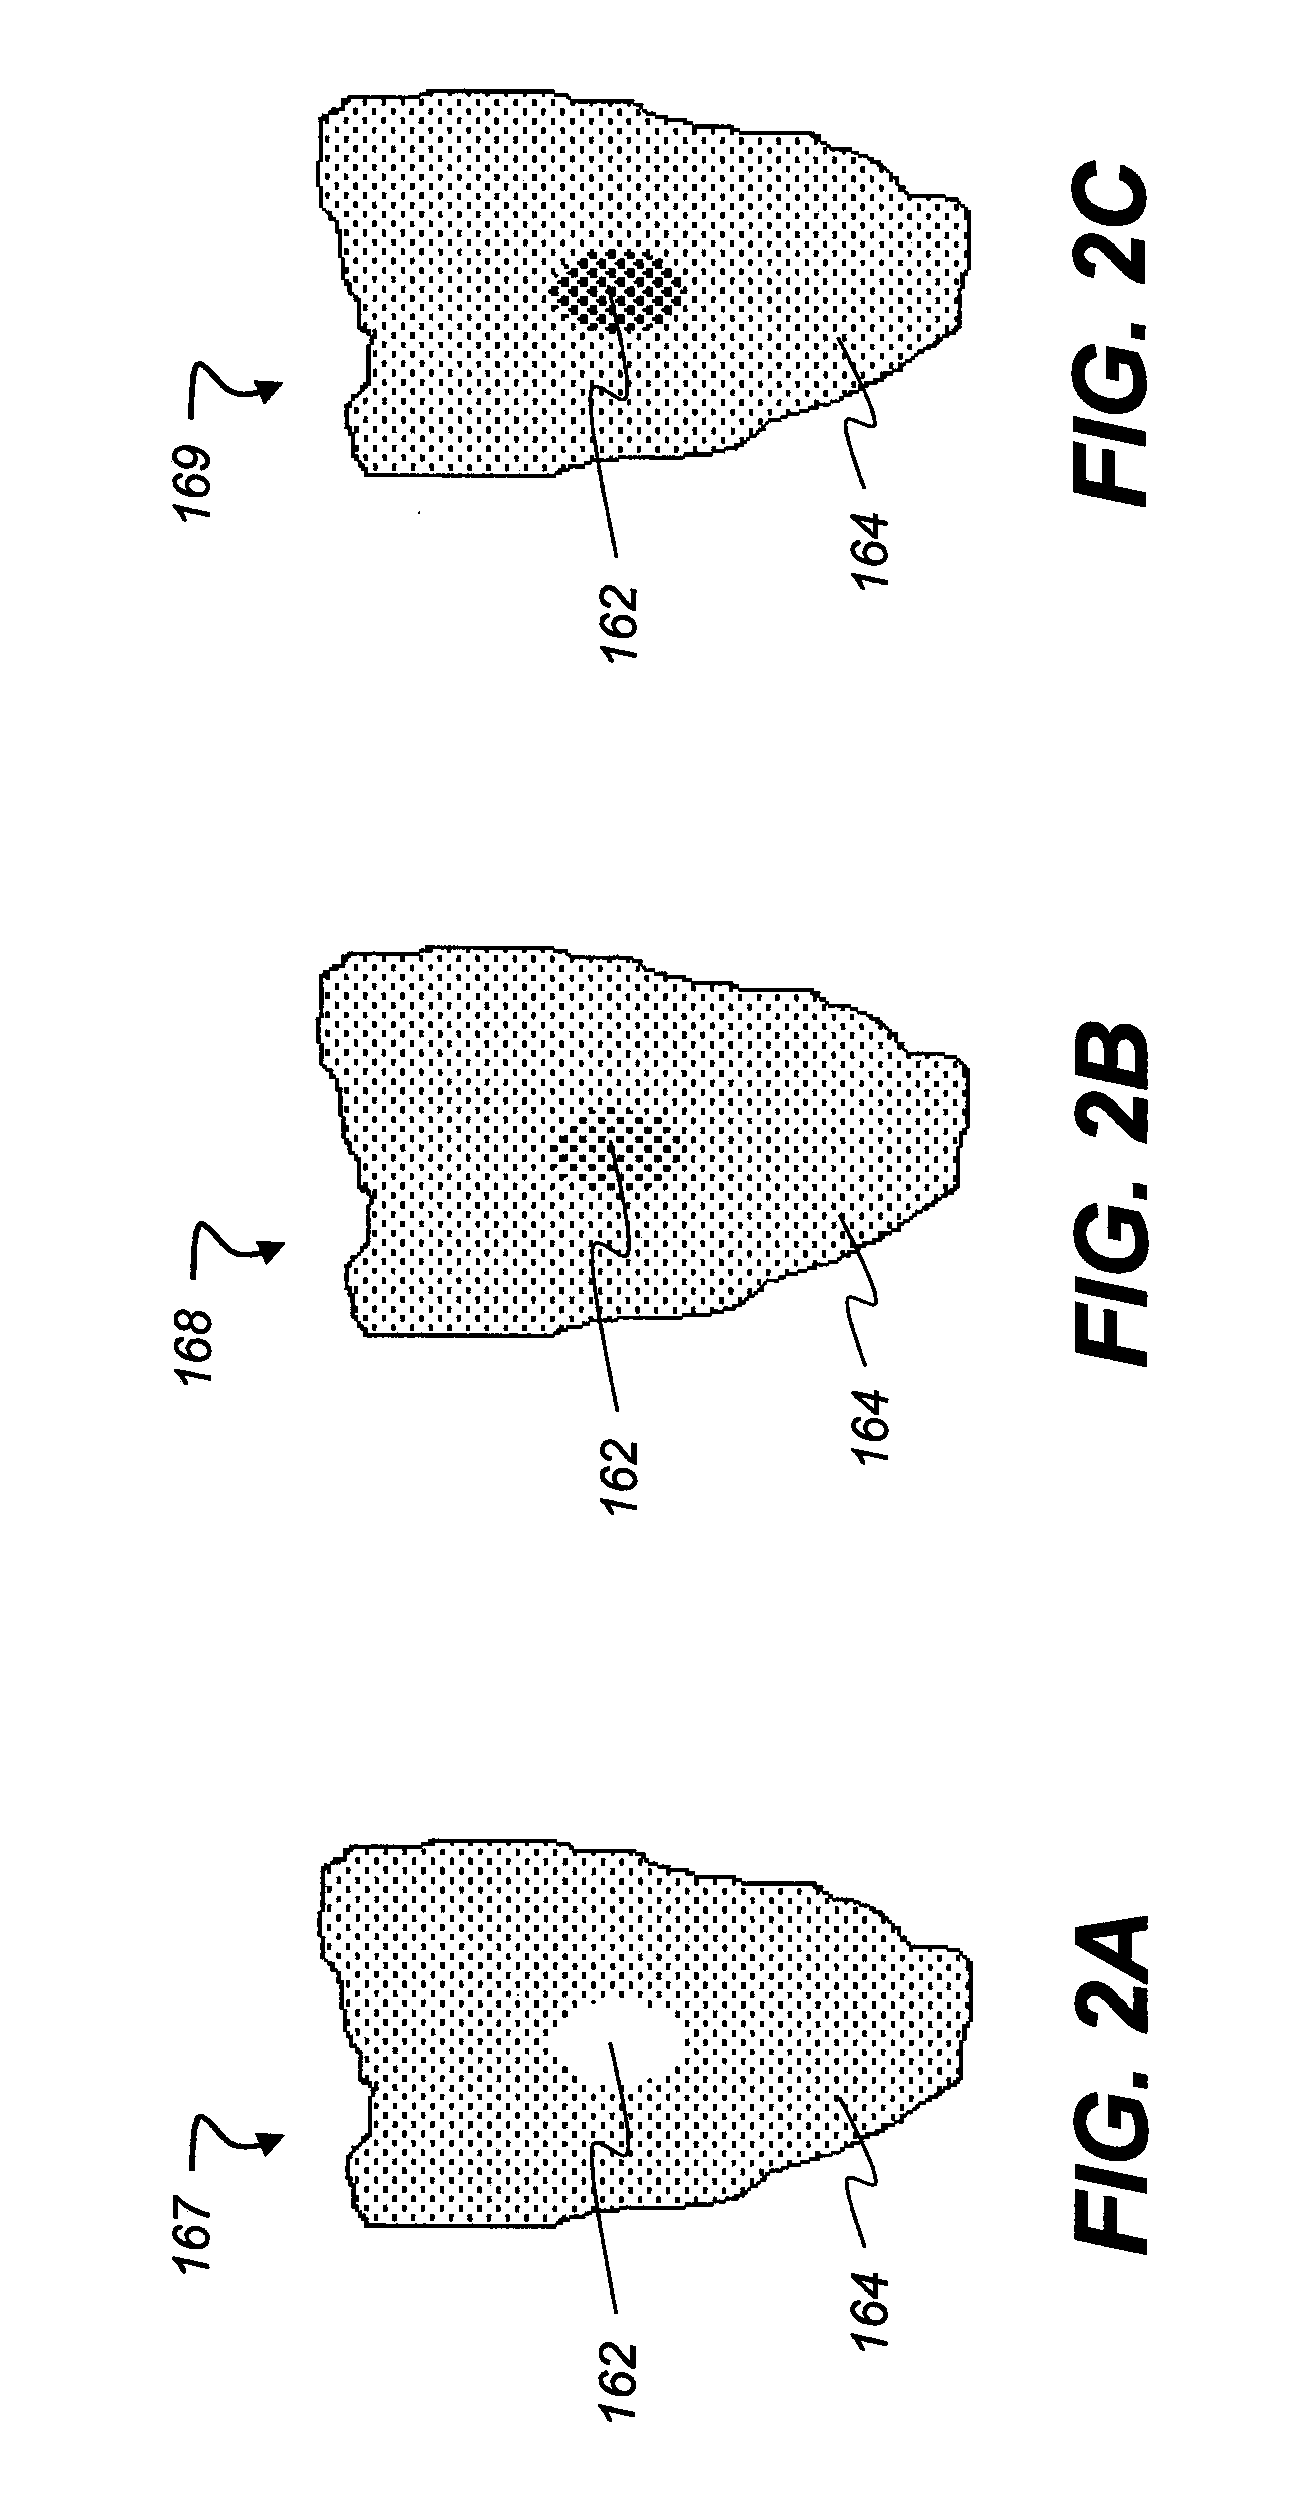 Method for locating an interproximal tooth region